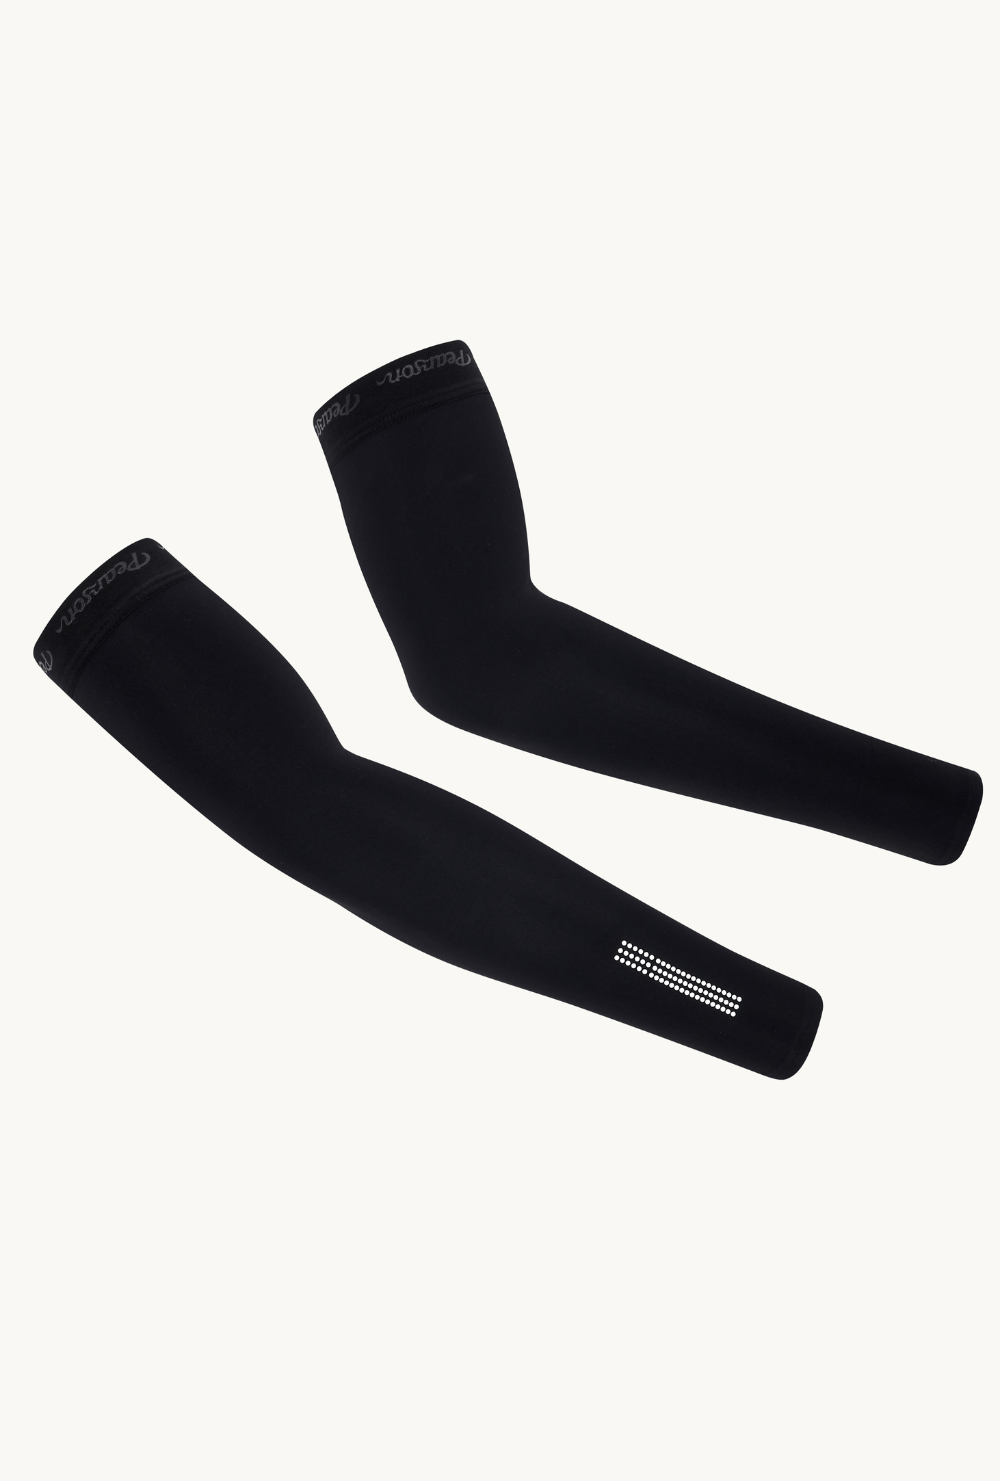 Pearson Cycles Pearson 1860, Call To Arms - Thermal Arm Warmers, Medium / Black